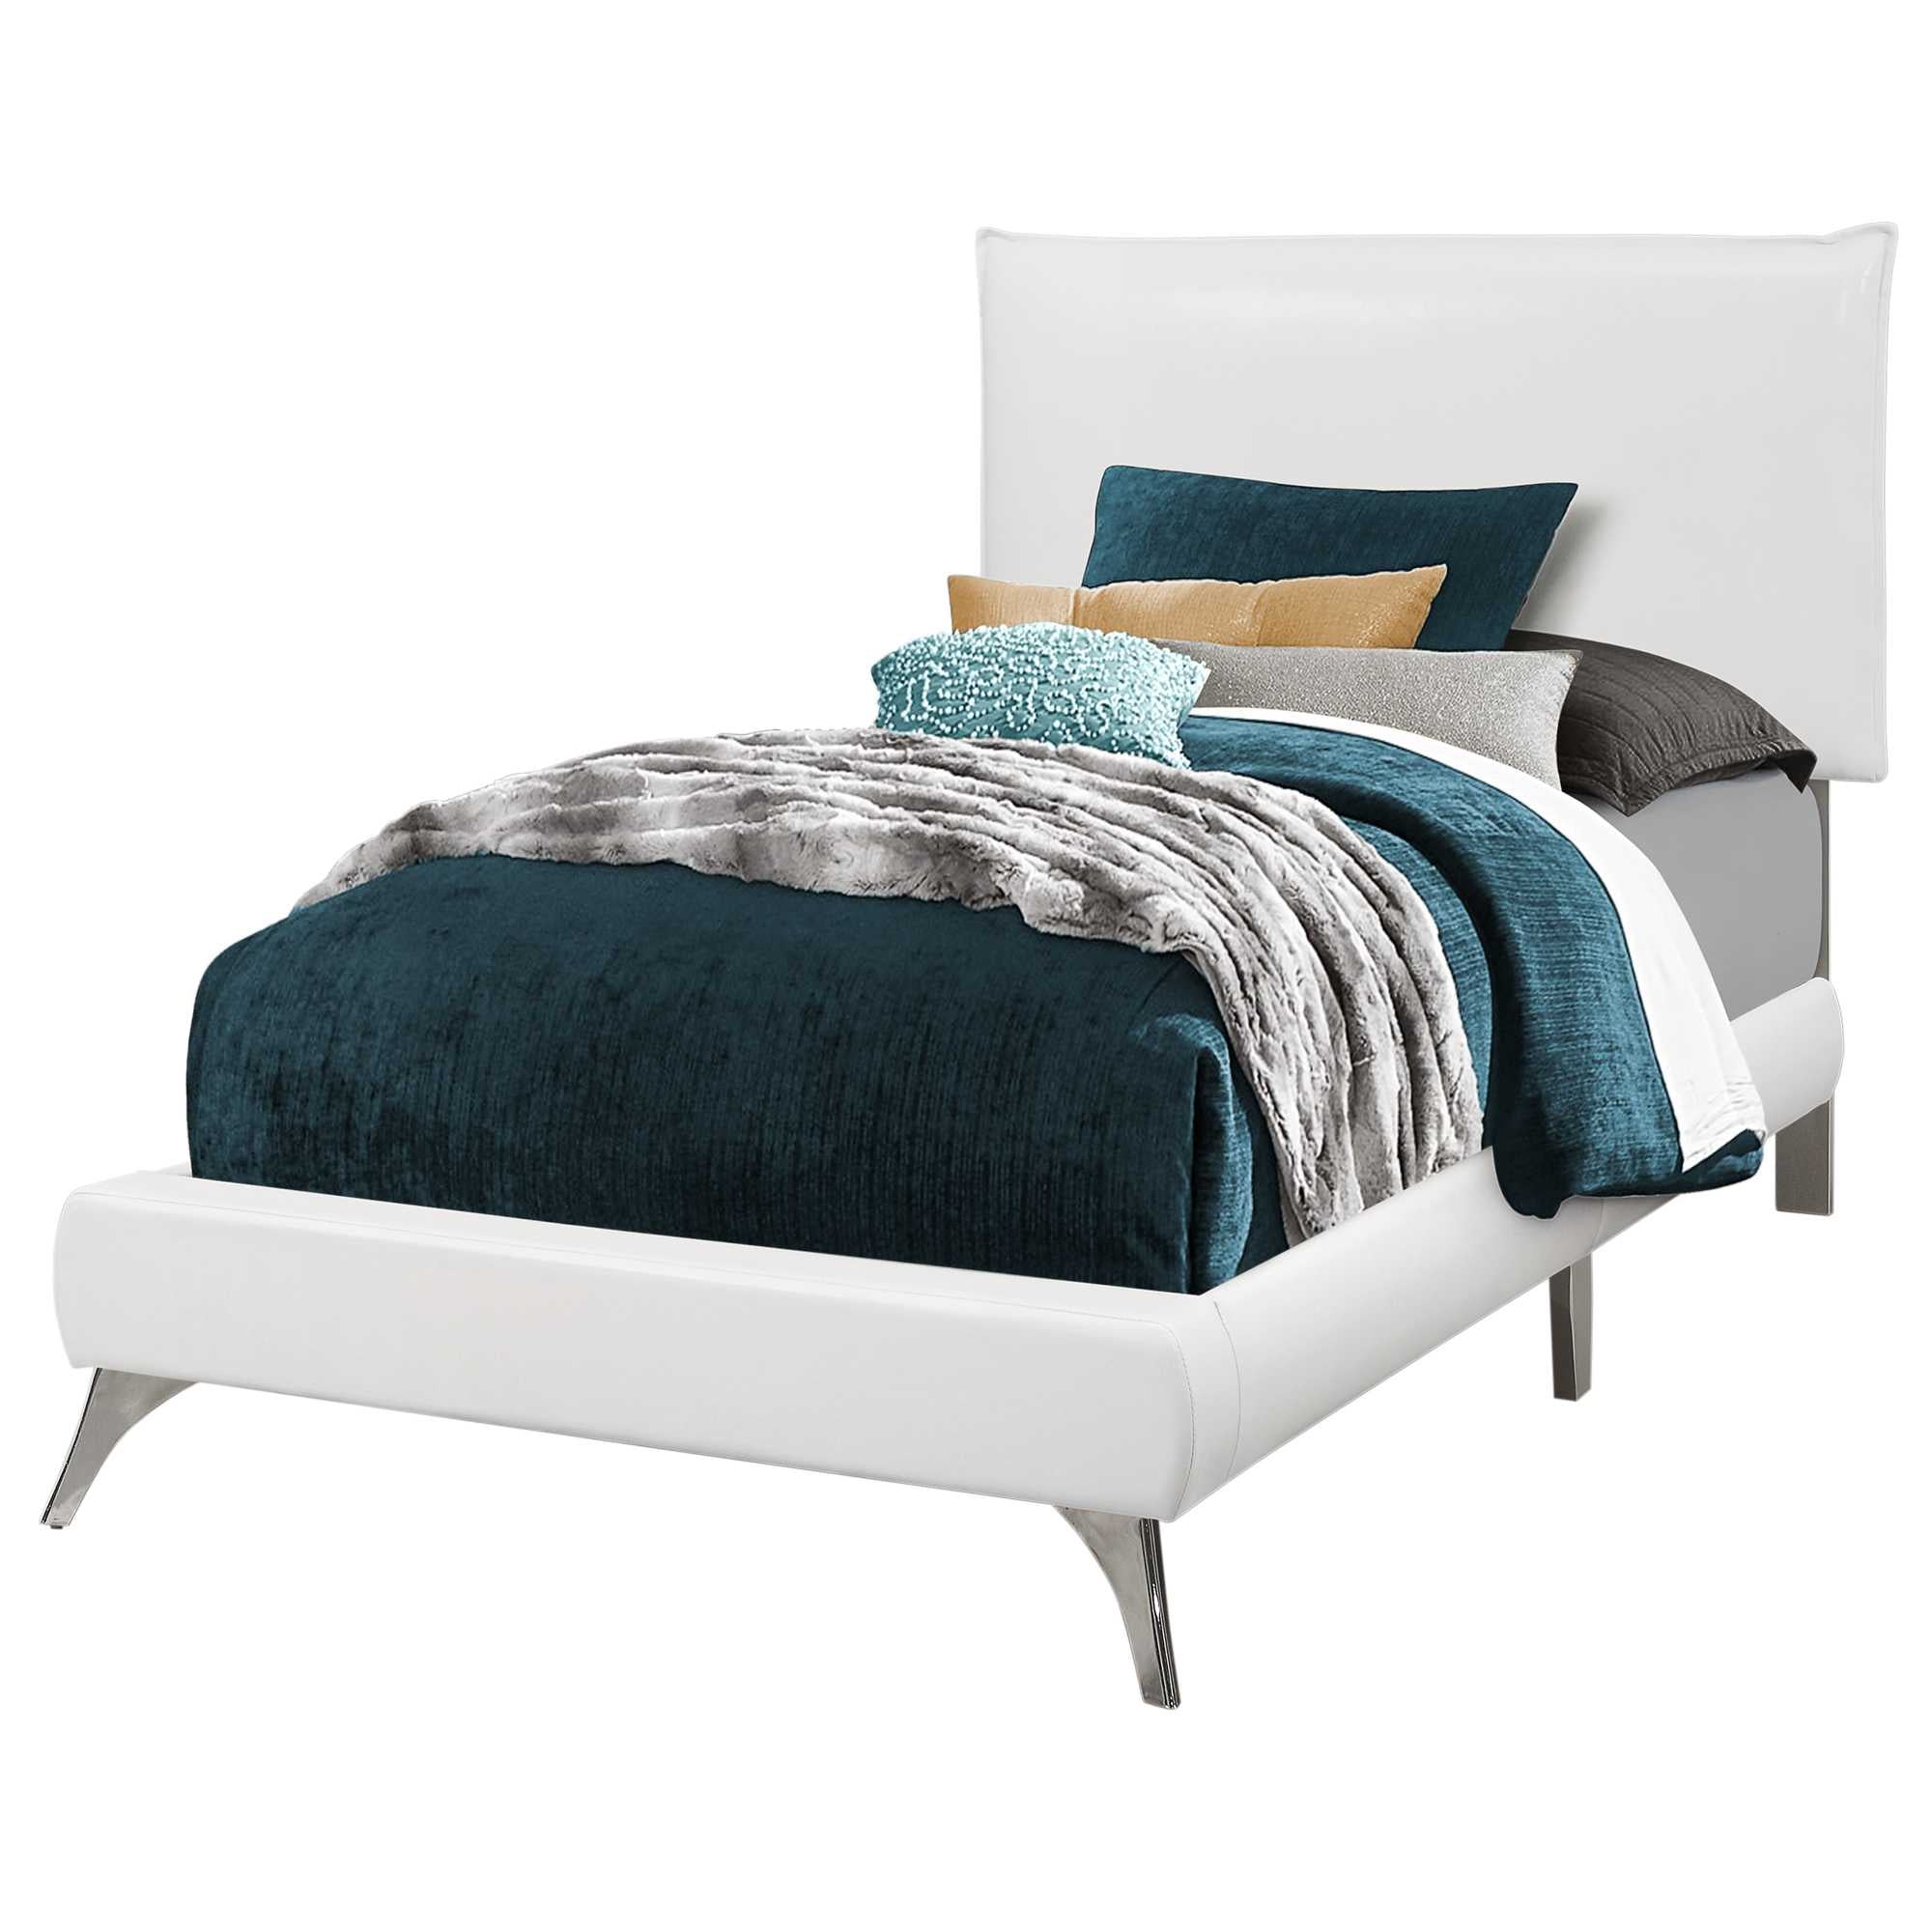 47.25" White Solid Wood MDF Foam and Linen Twin Sized Bed with Chrome Legs Default Title